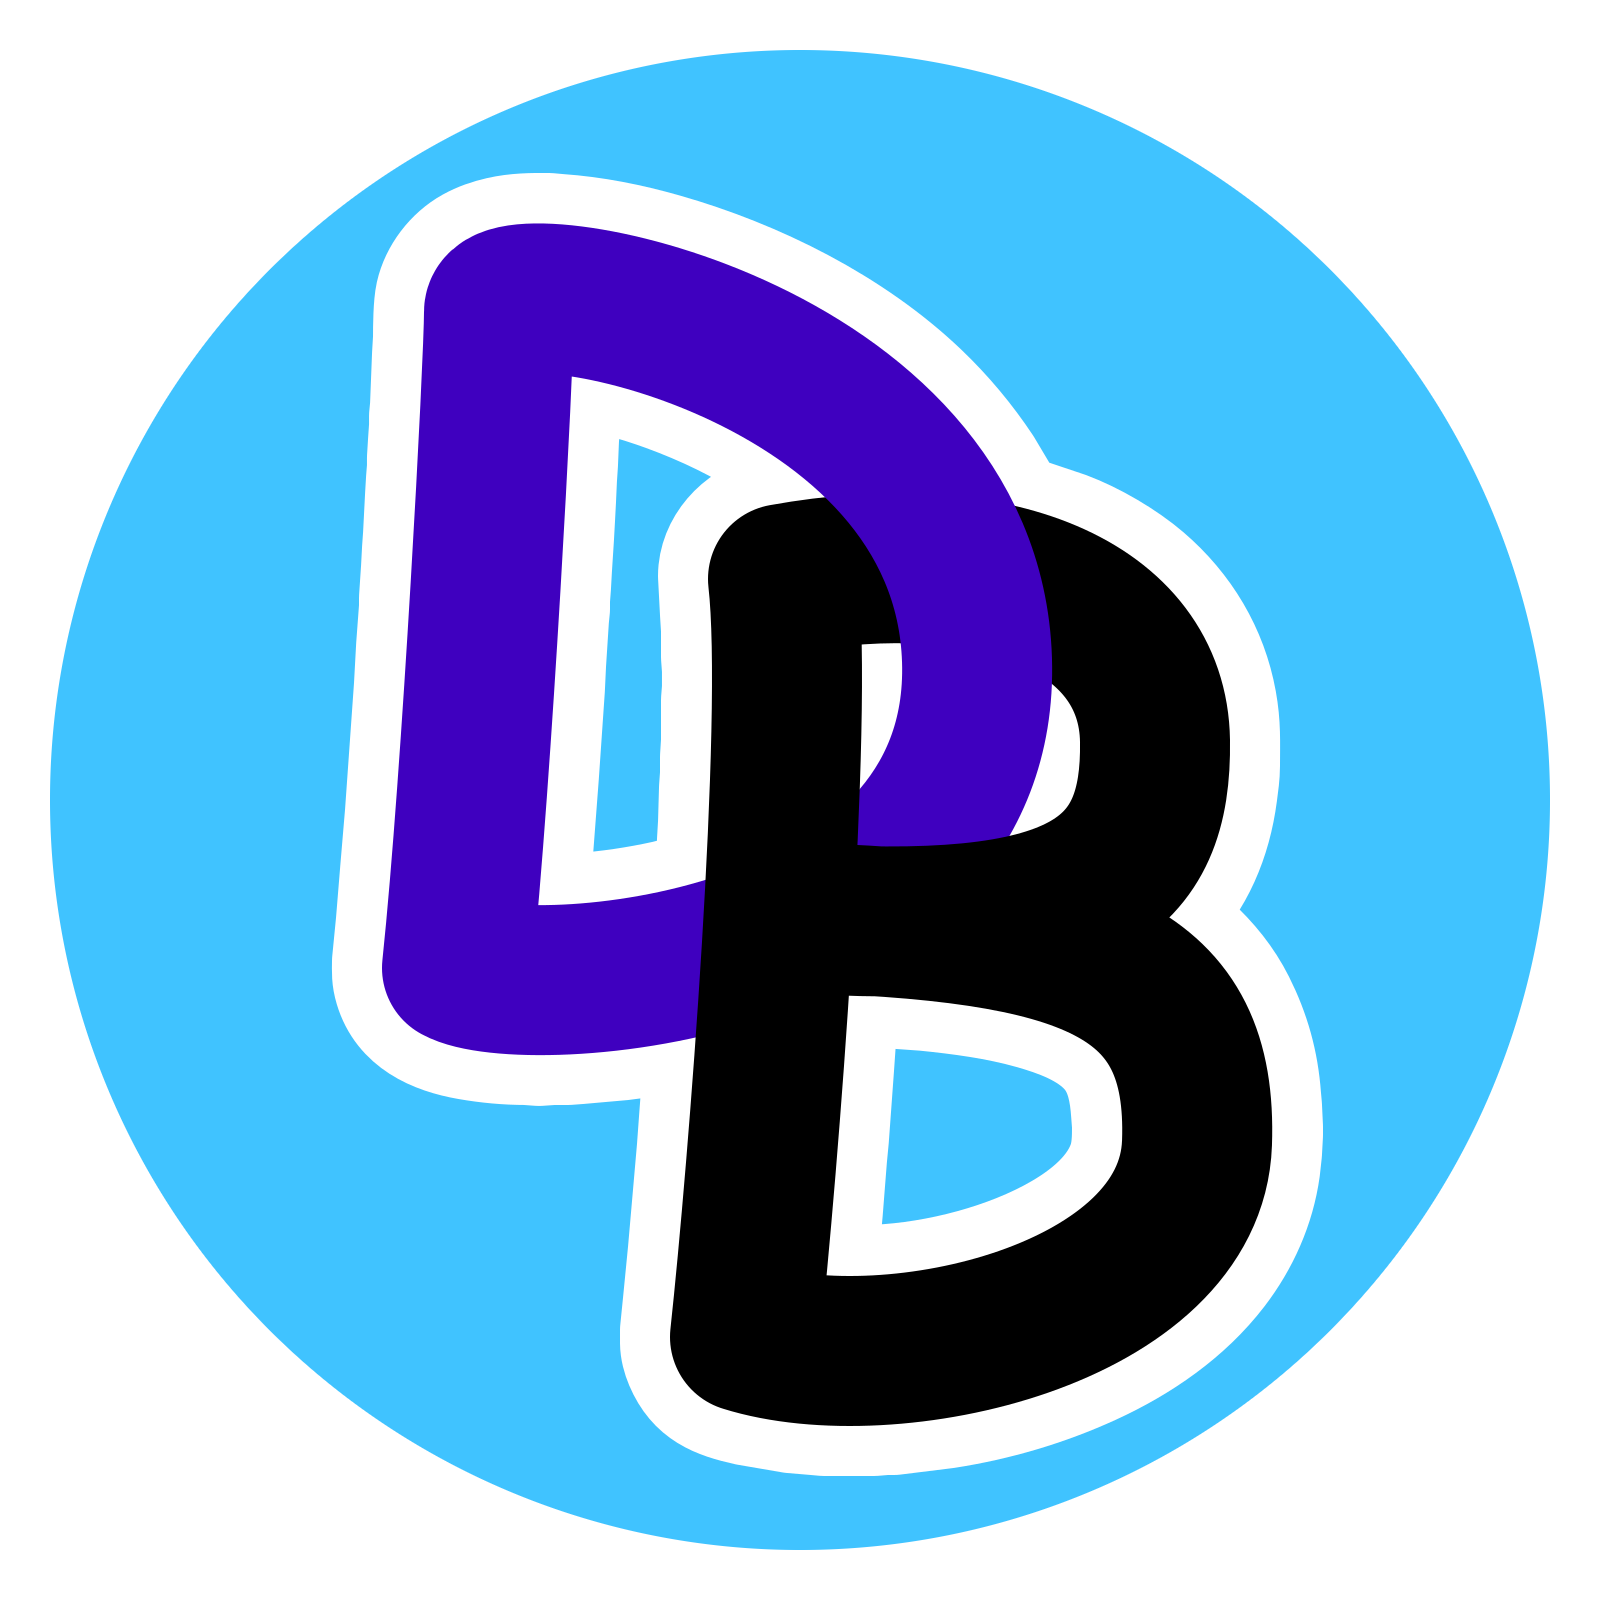 The fourth official DurchBurch logo.  It also makes use of an entangled DB with a blue circle behind the letters and a white stroke behind the letters for increased contrast and another stroke outside of the circle providing an almost stickerlike appearance.